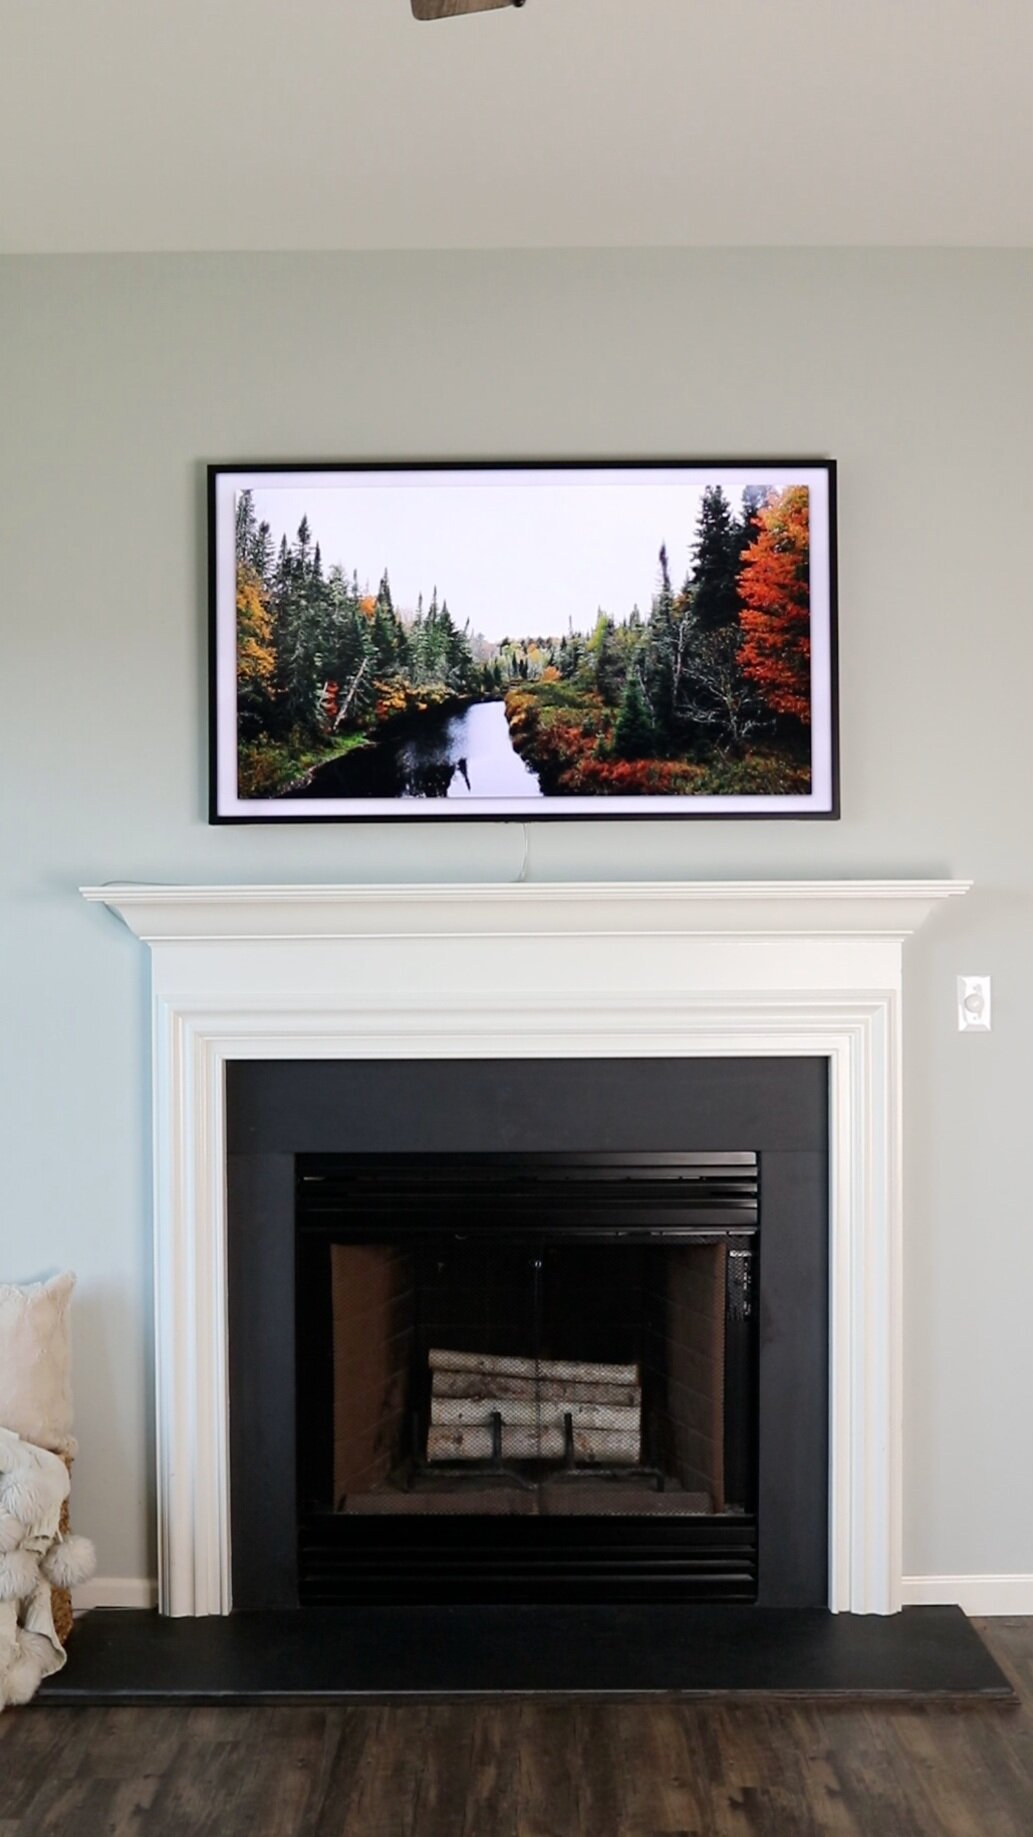 How to decorate tv above fireplace mantel heart fall autumn décor 